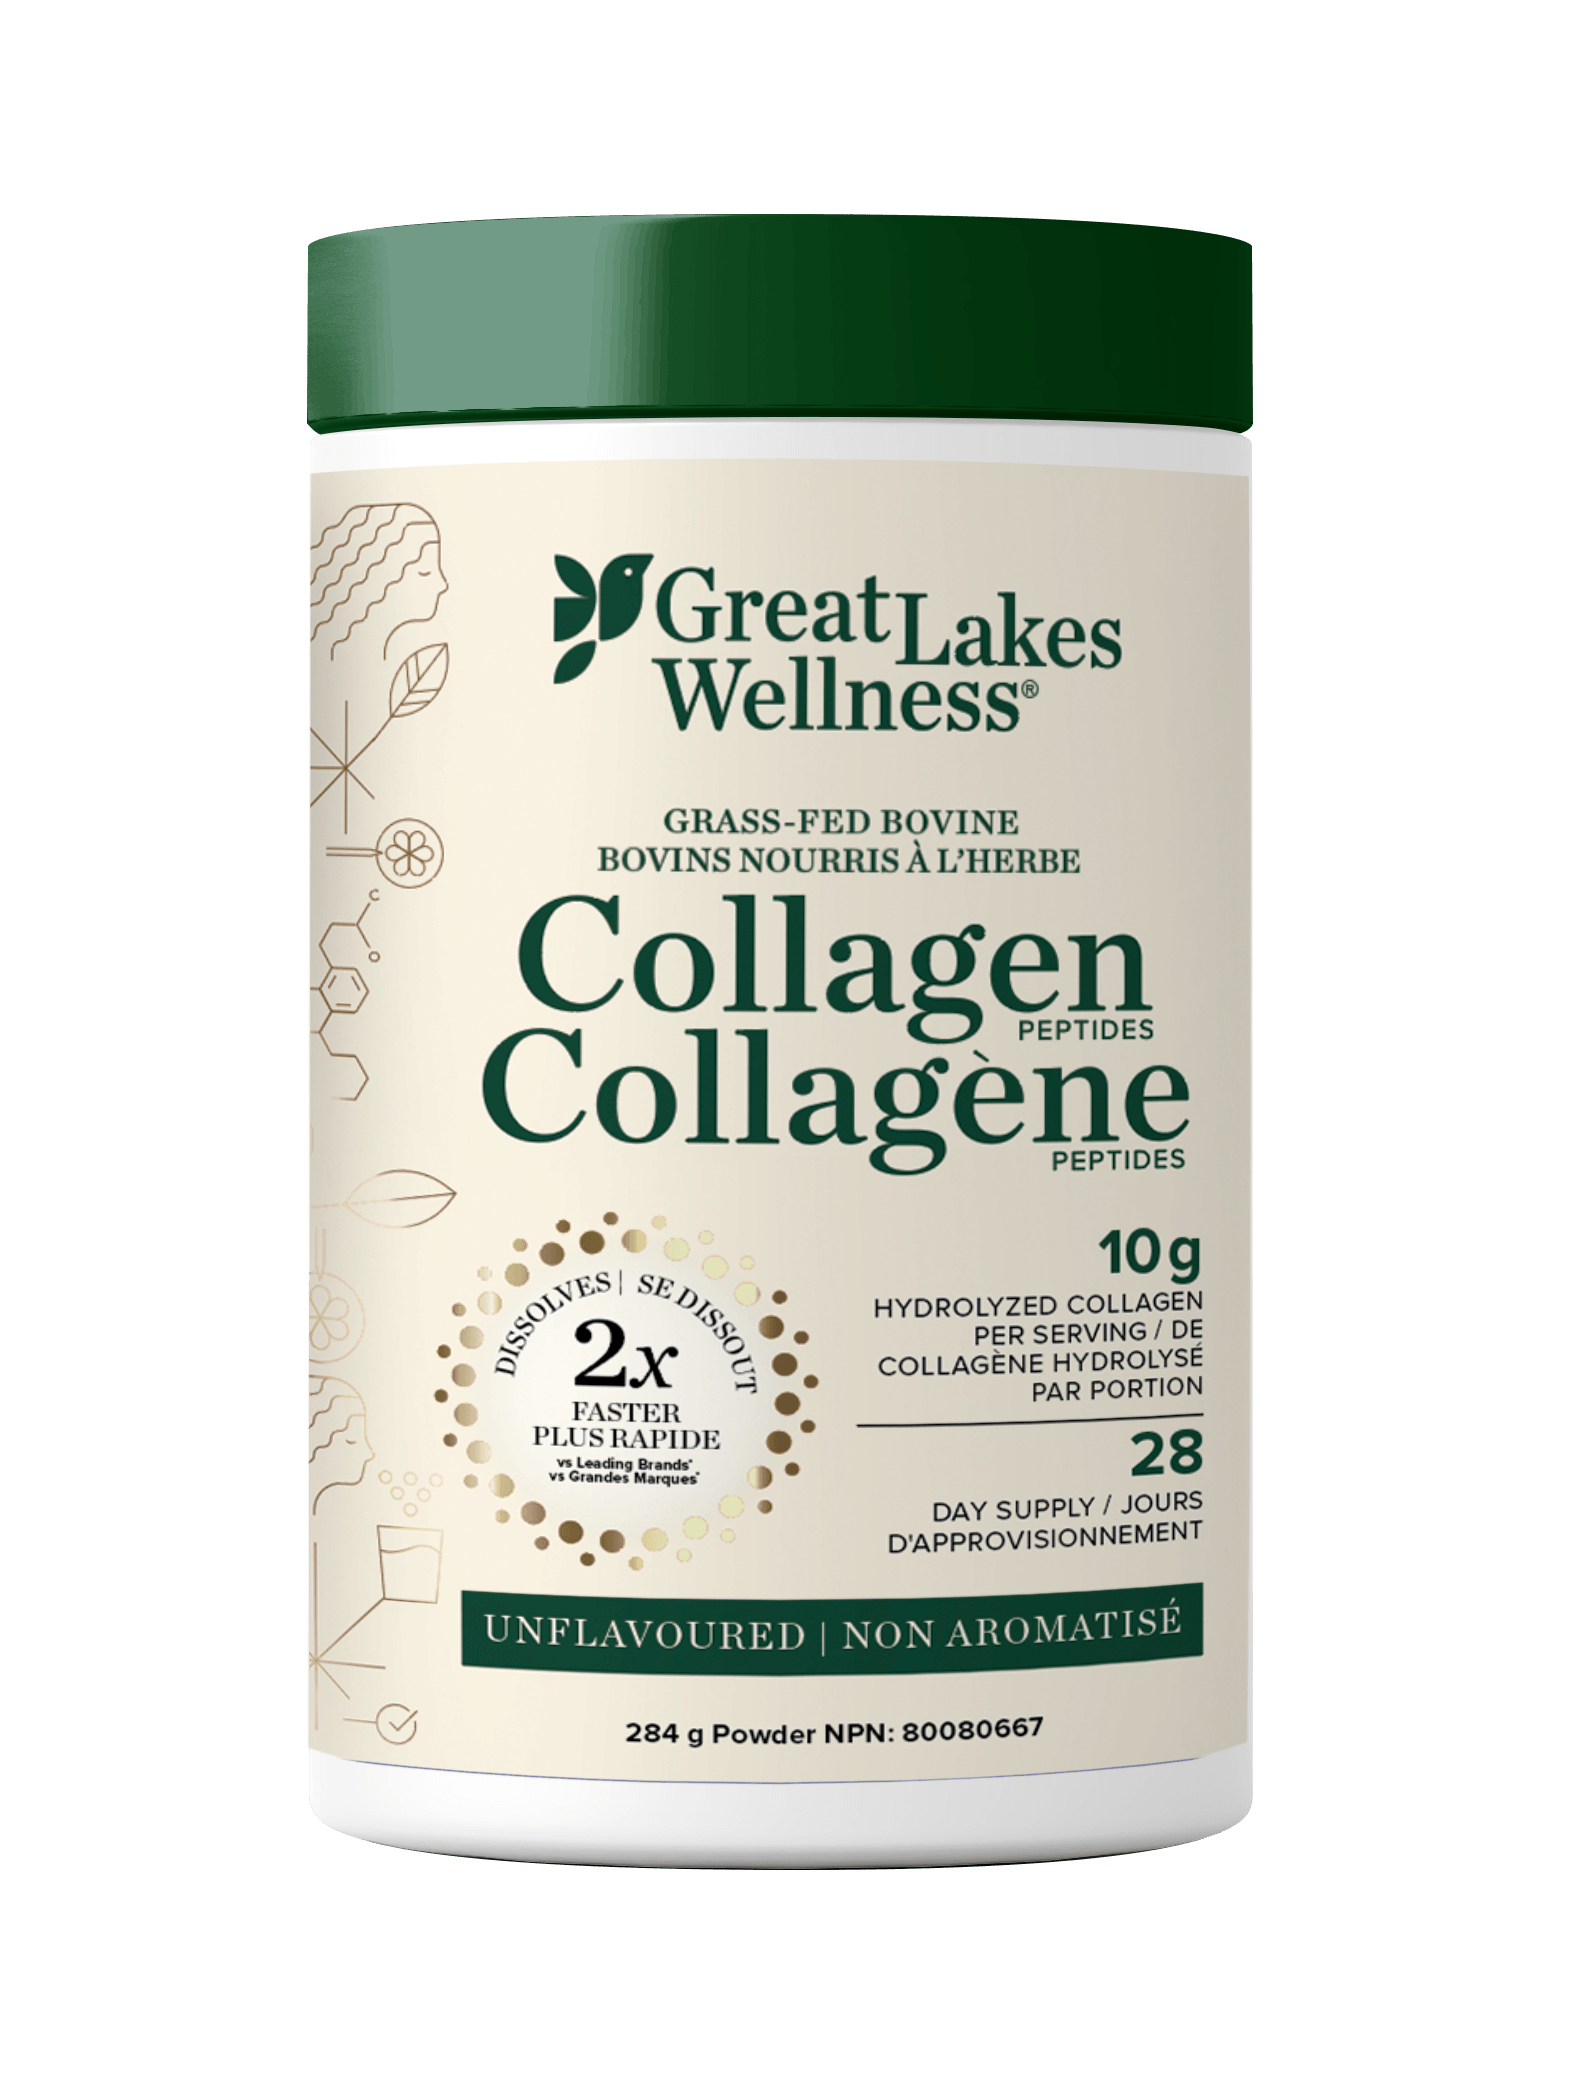 Great Lakes Grass-Fed Bovine Collagen Peptides 284g